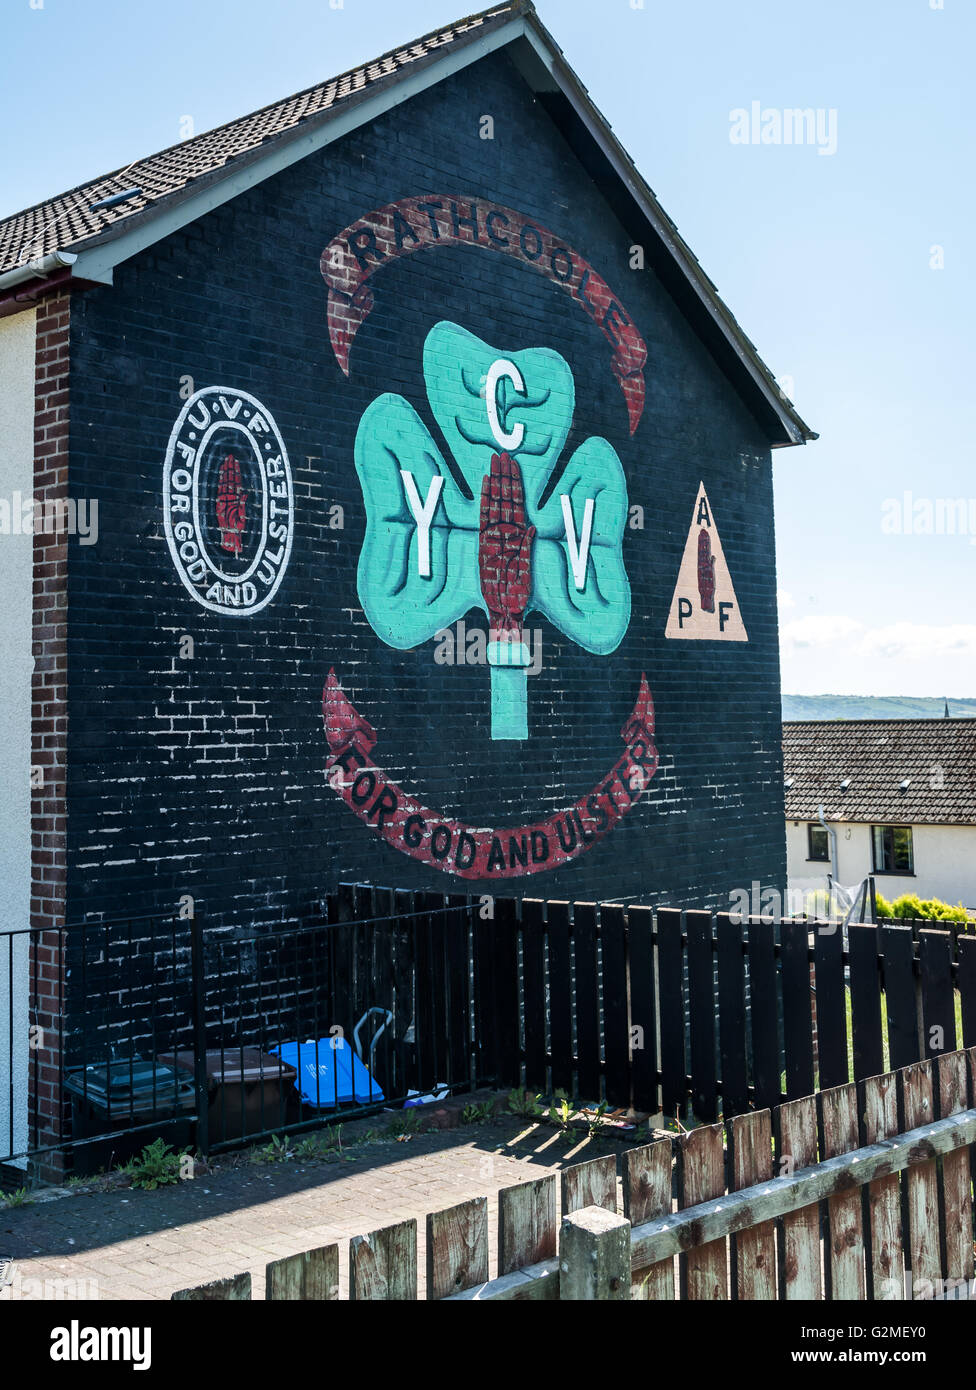 Rathcoole For God and Ulster UVF PAF mural. Stock Photo